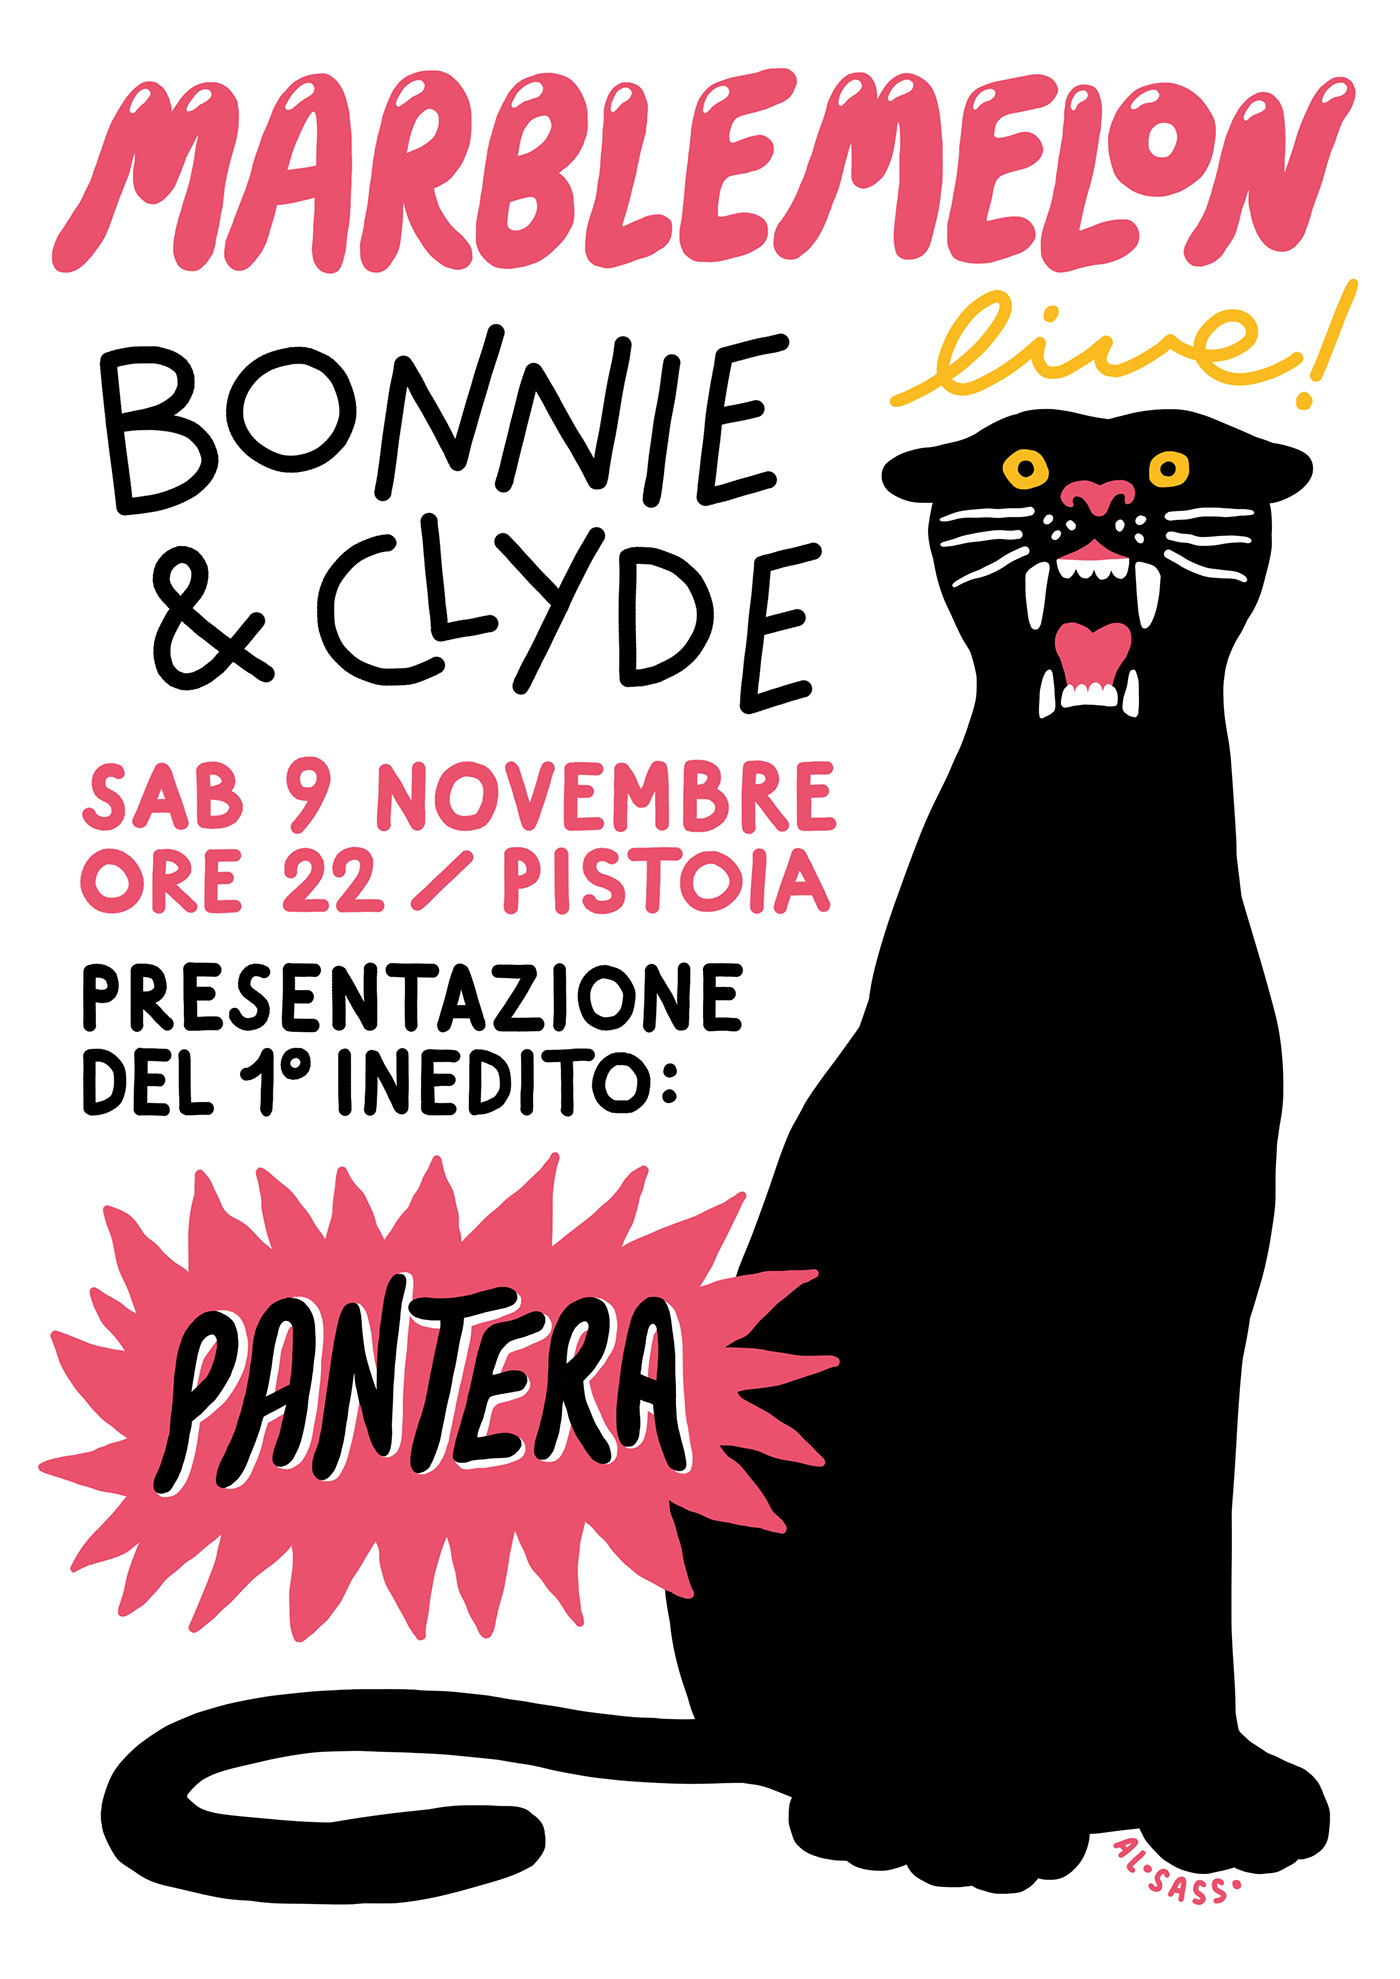 pantera panther jungle marblemelon alosasso alessandro sasso Funk 80s night club BONNIE & CLYDE